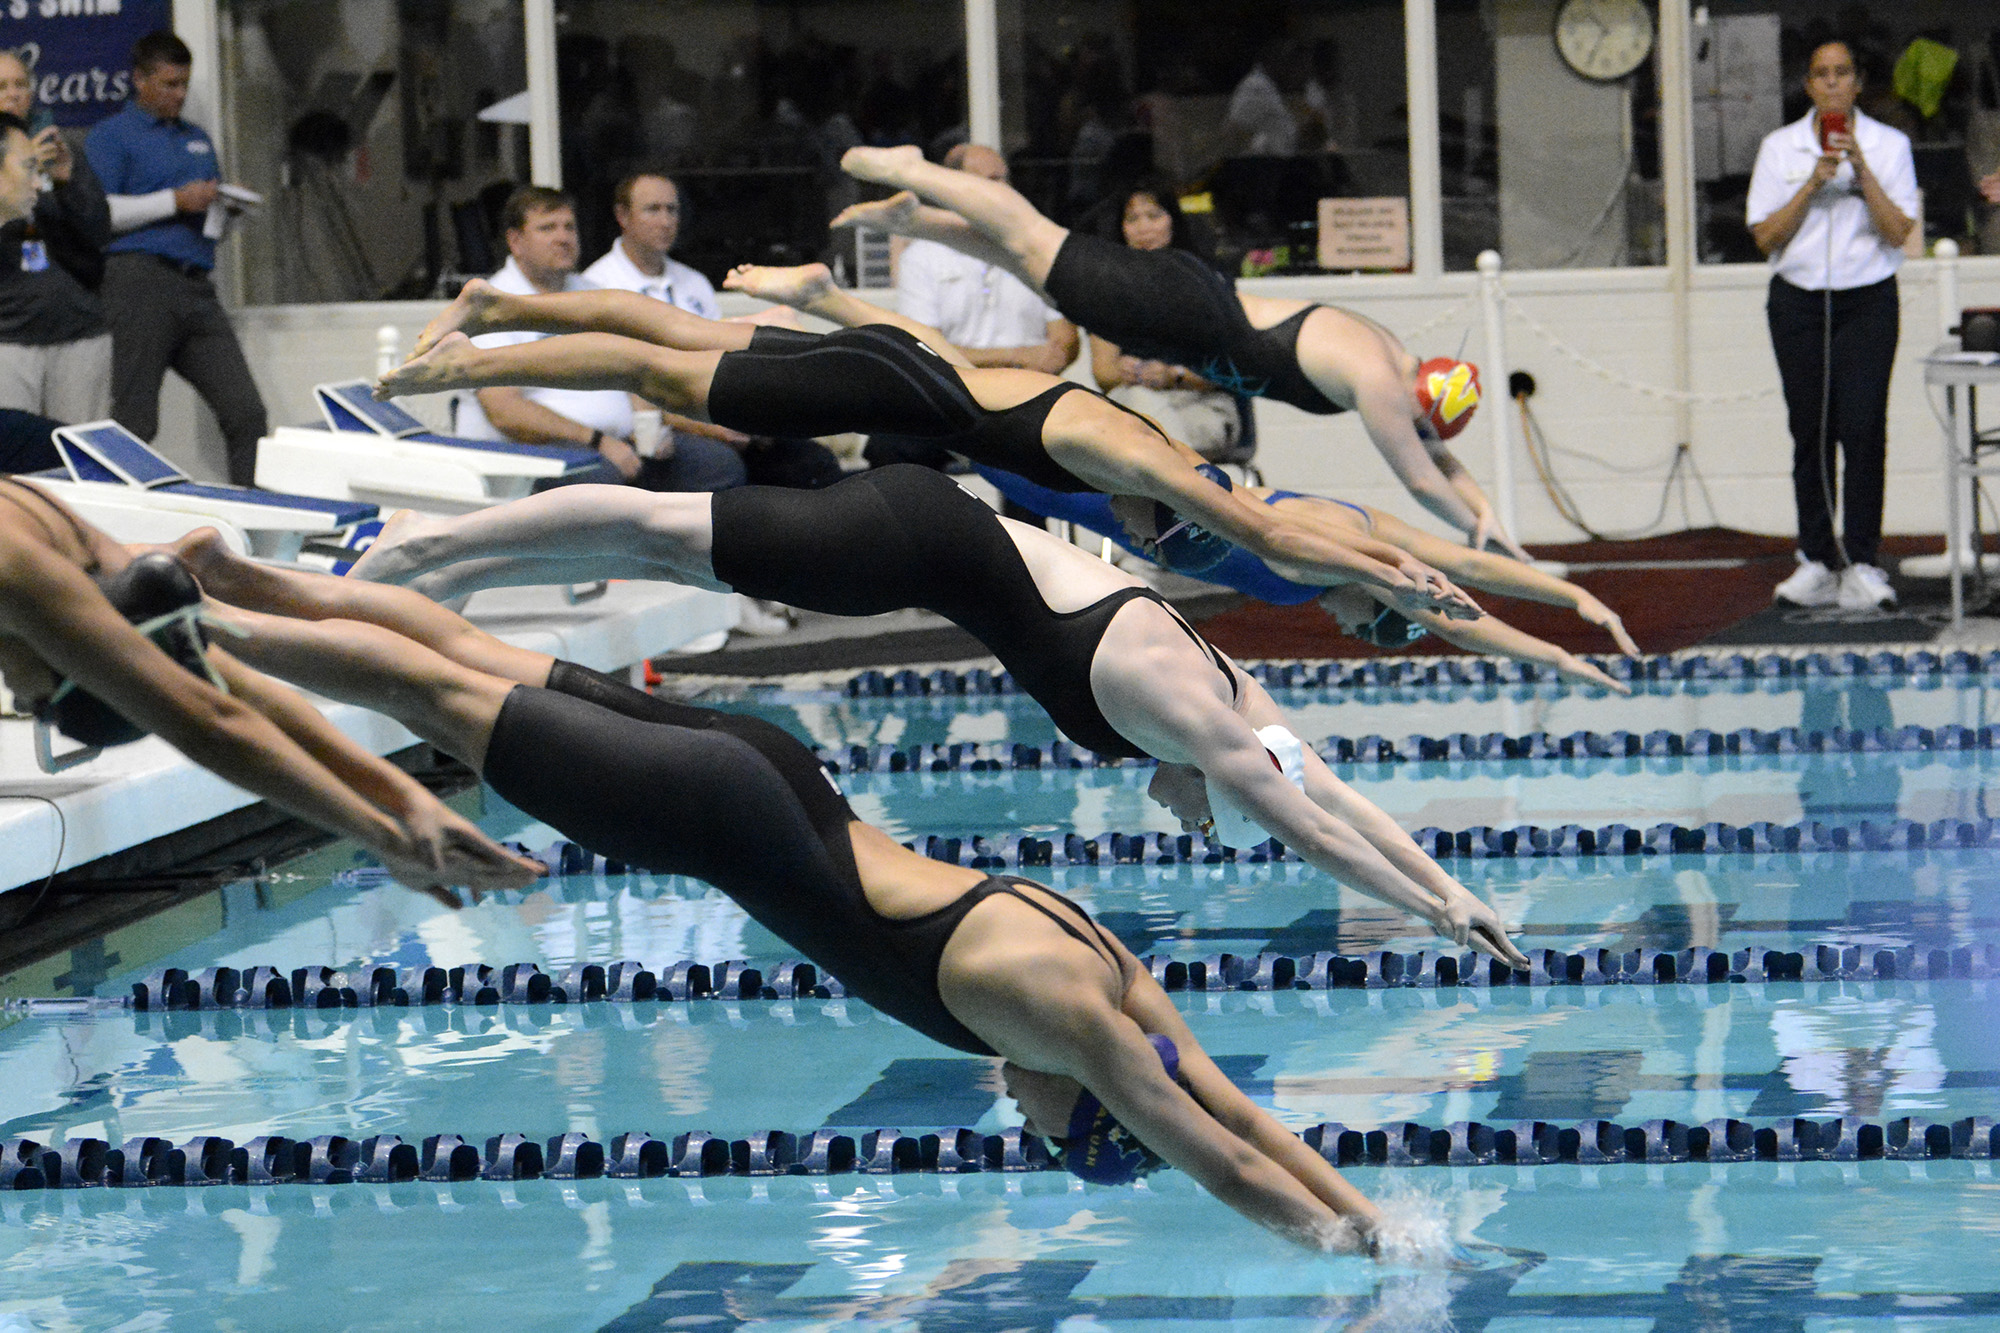 Campbell Deringer of Camas (center, white cap) takes off at the 4A final of the 100 breaststroke at the state swim meet at Federal Way on Saturday, Nov. 12, 2022.